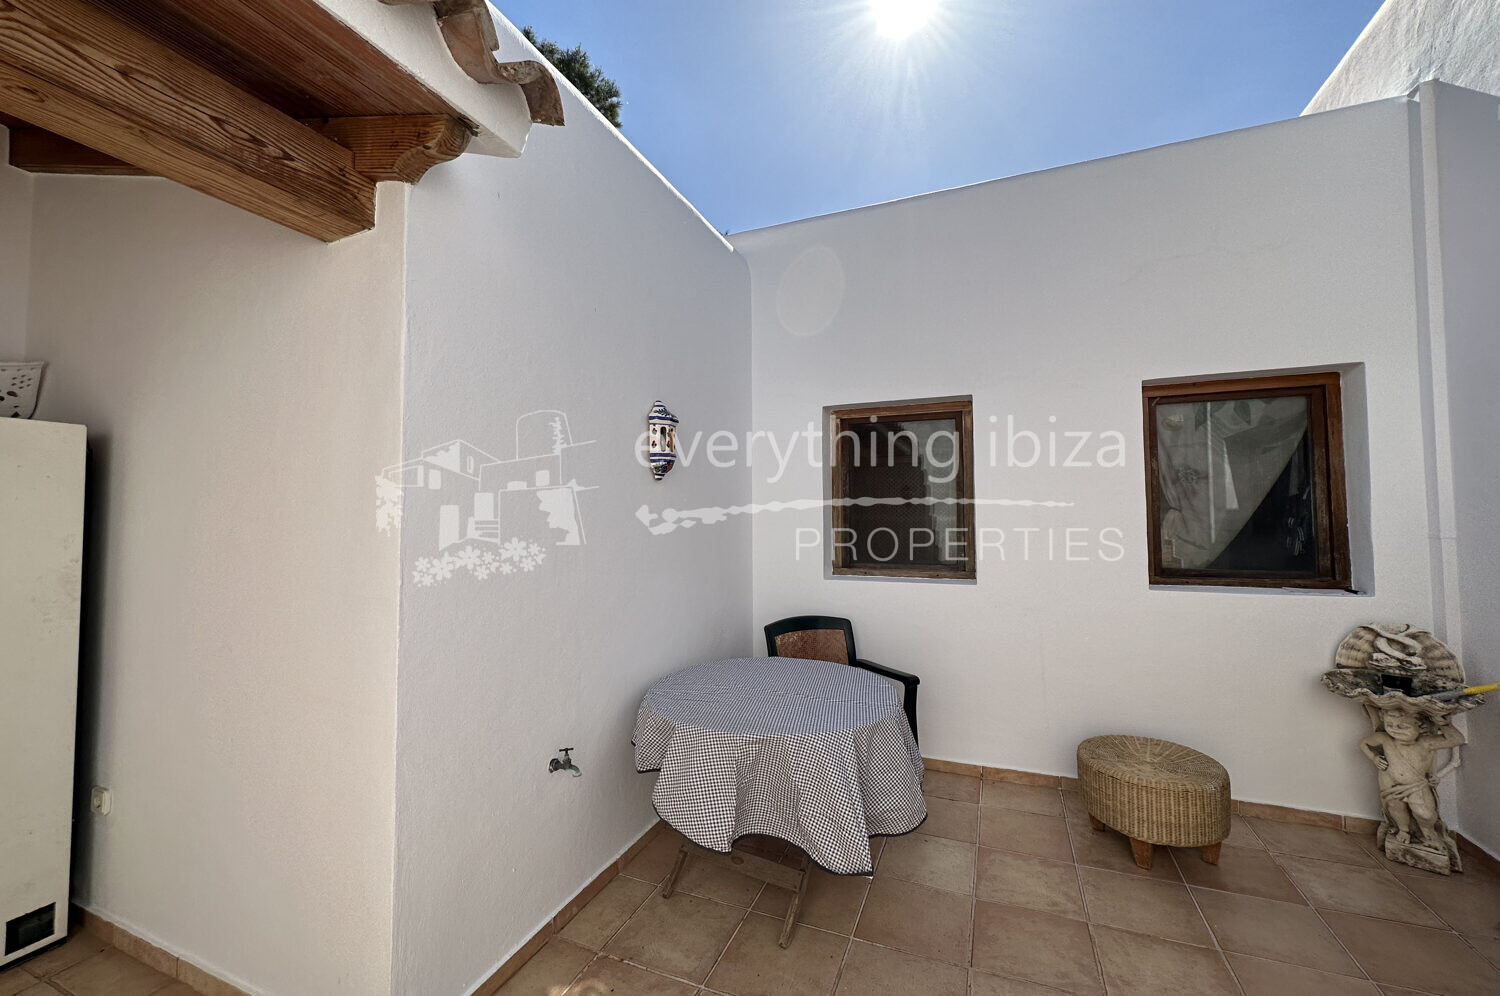 Charming Traditionally Styled Villa Set on a Large Country Plot, ref. 1546, for sale in Ibiza by everything ibiza Properties